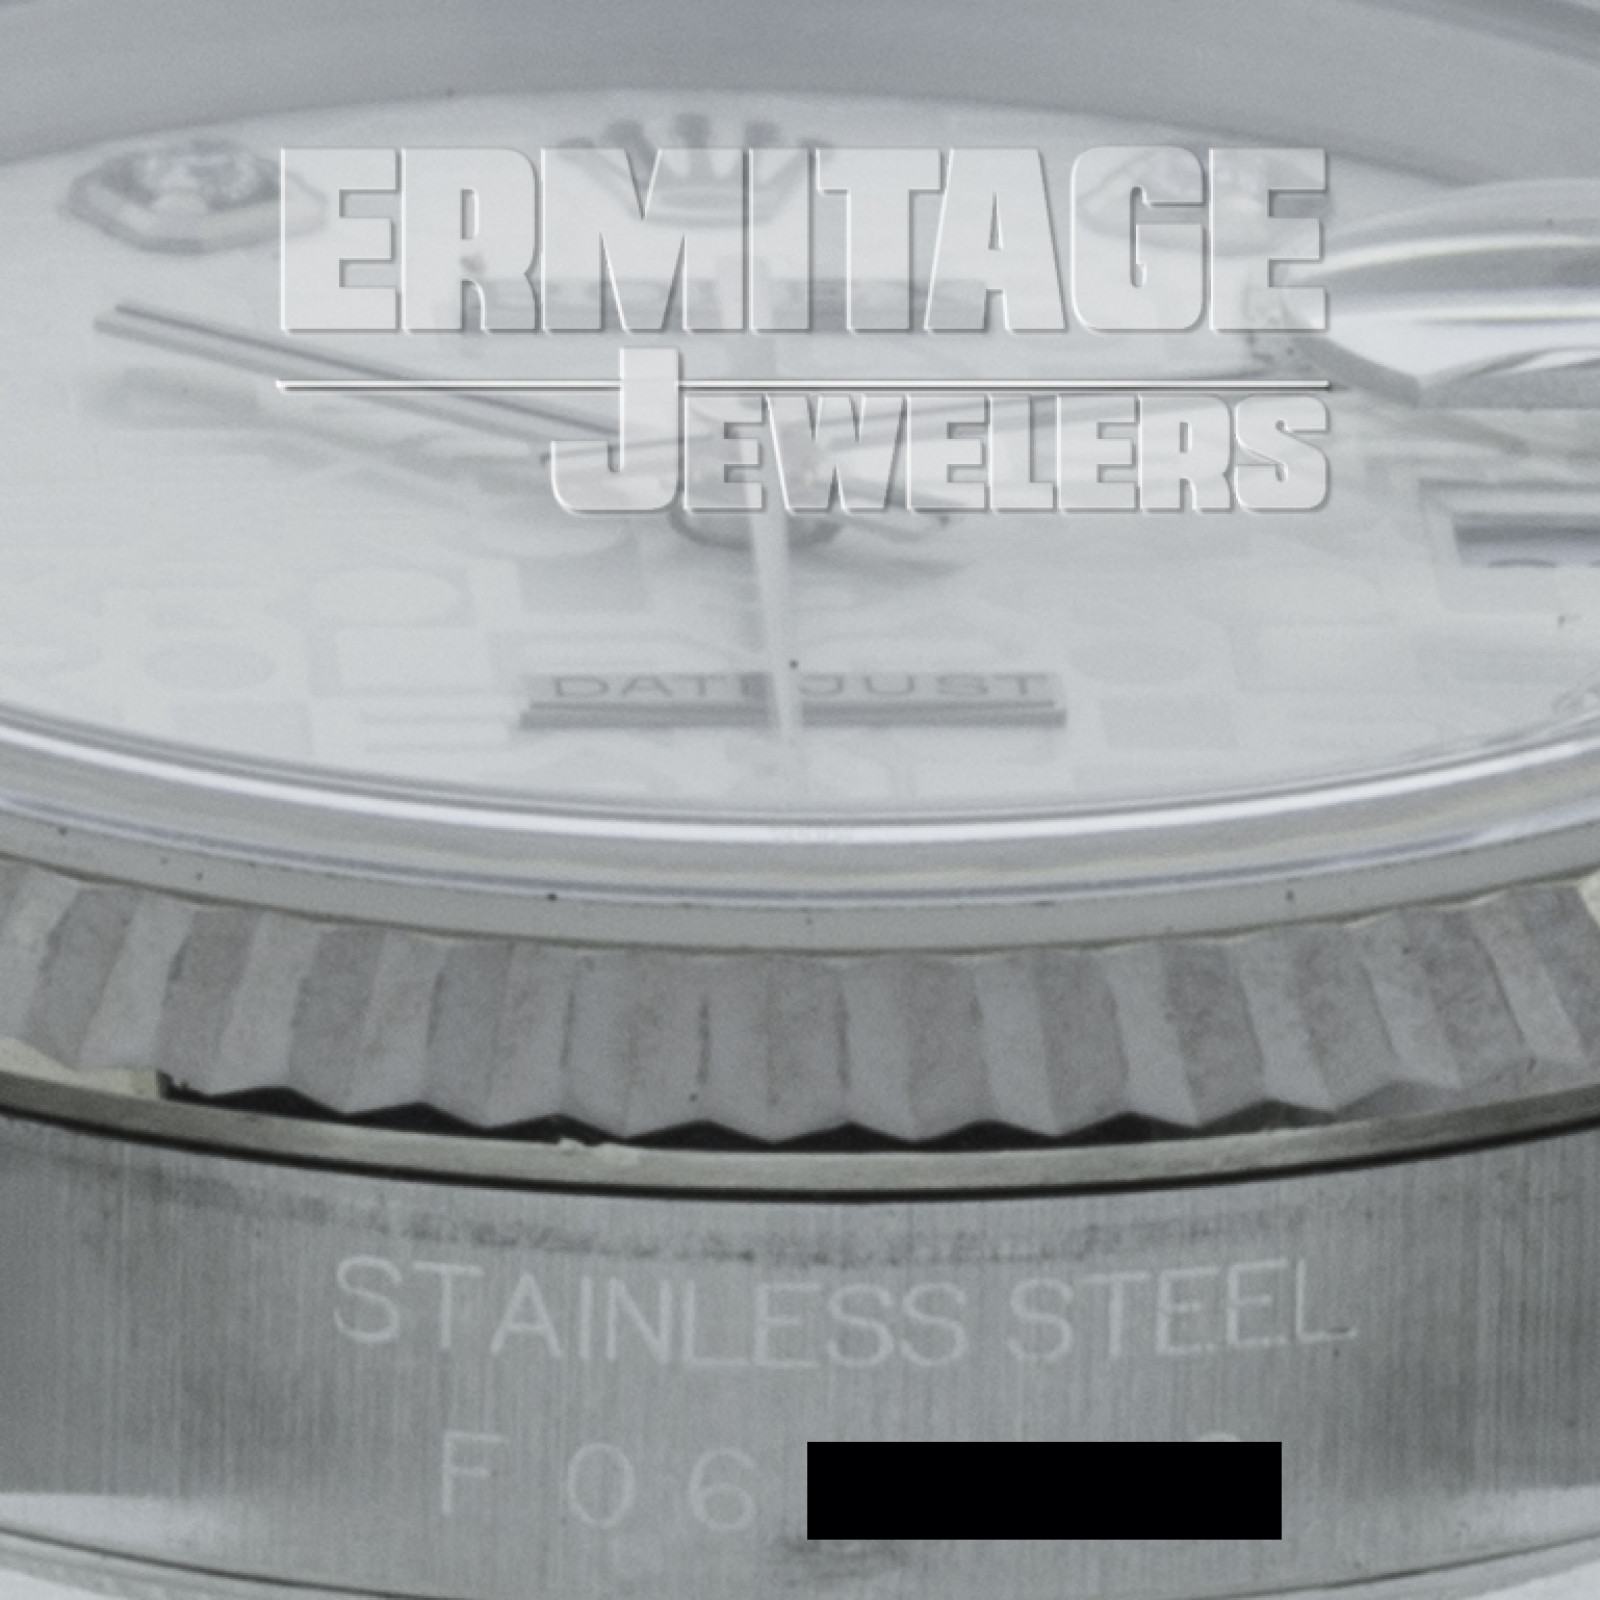 Steel on Oyster Rolex Datejust 16234 36 mm